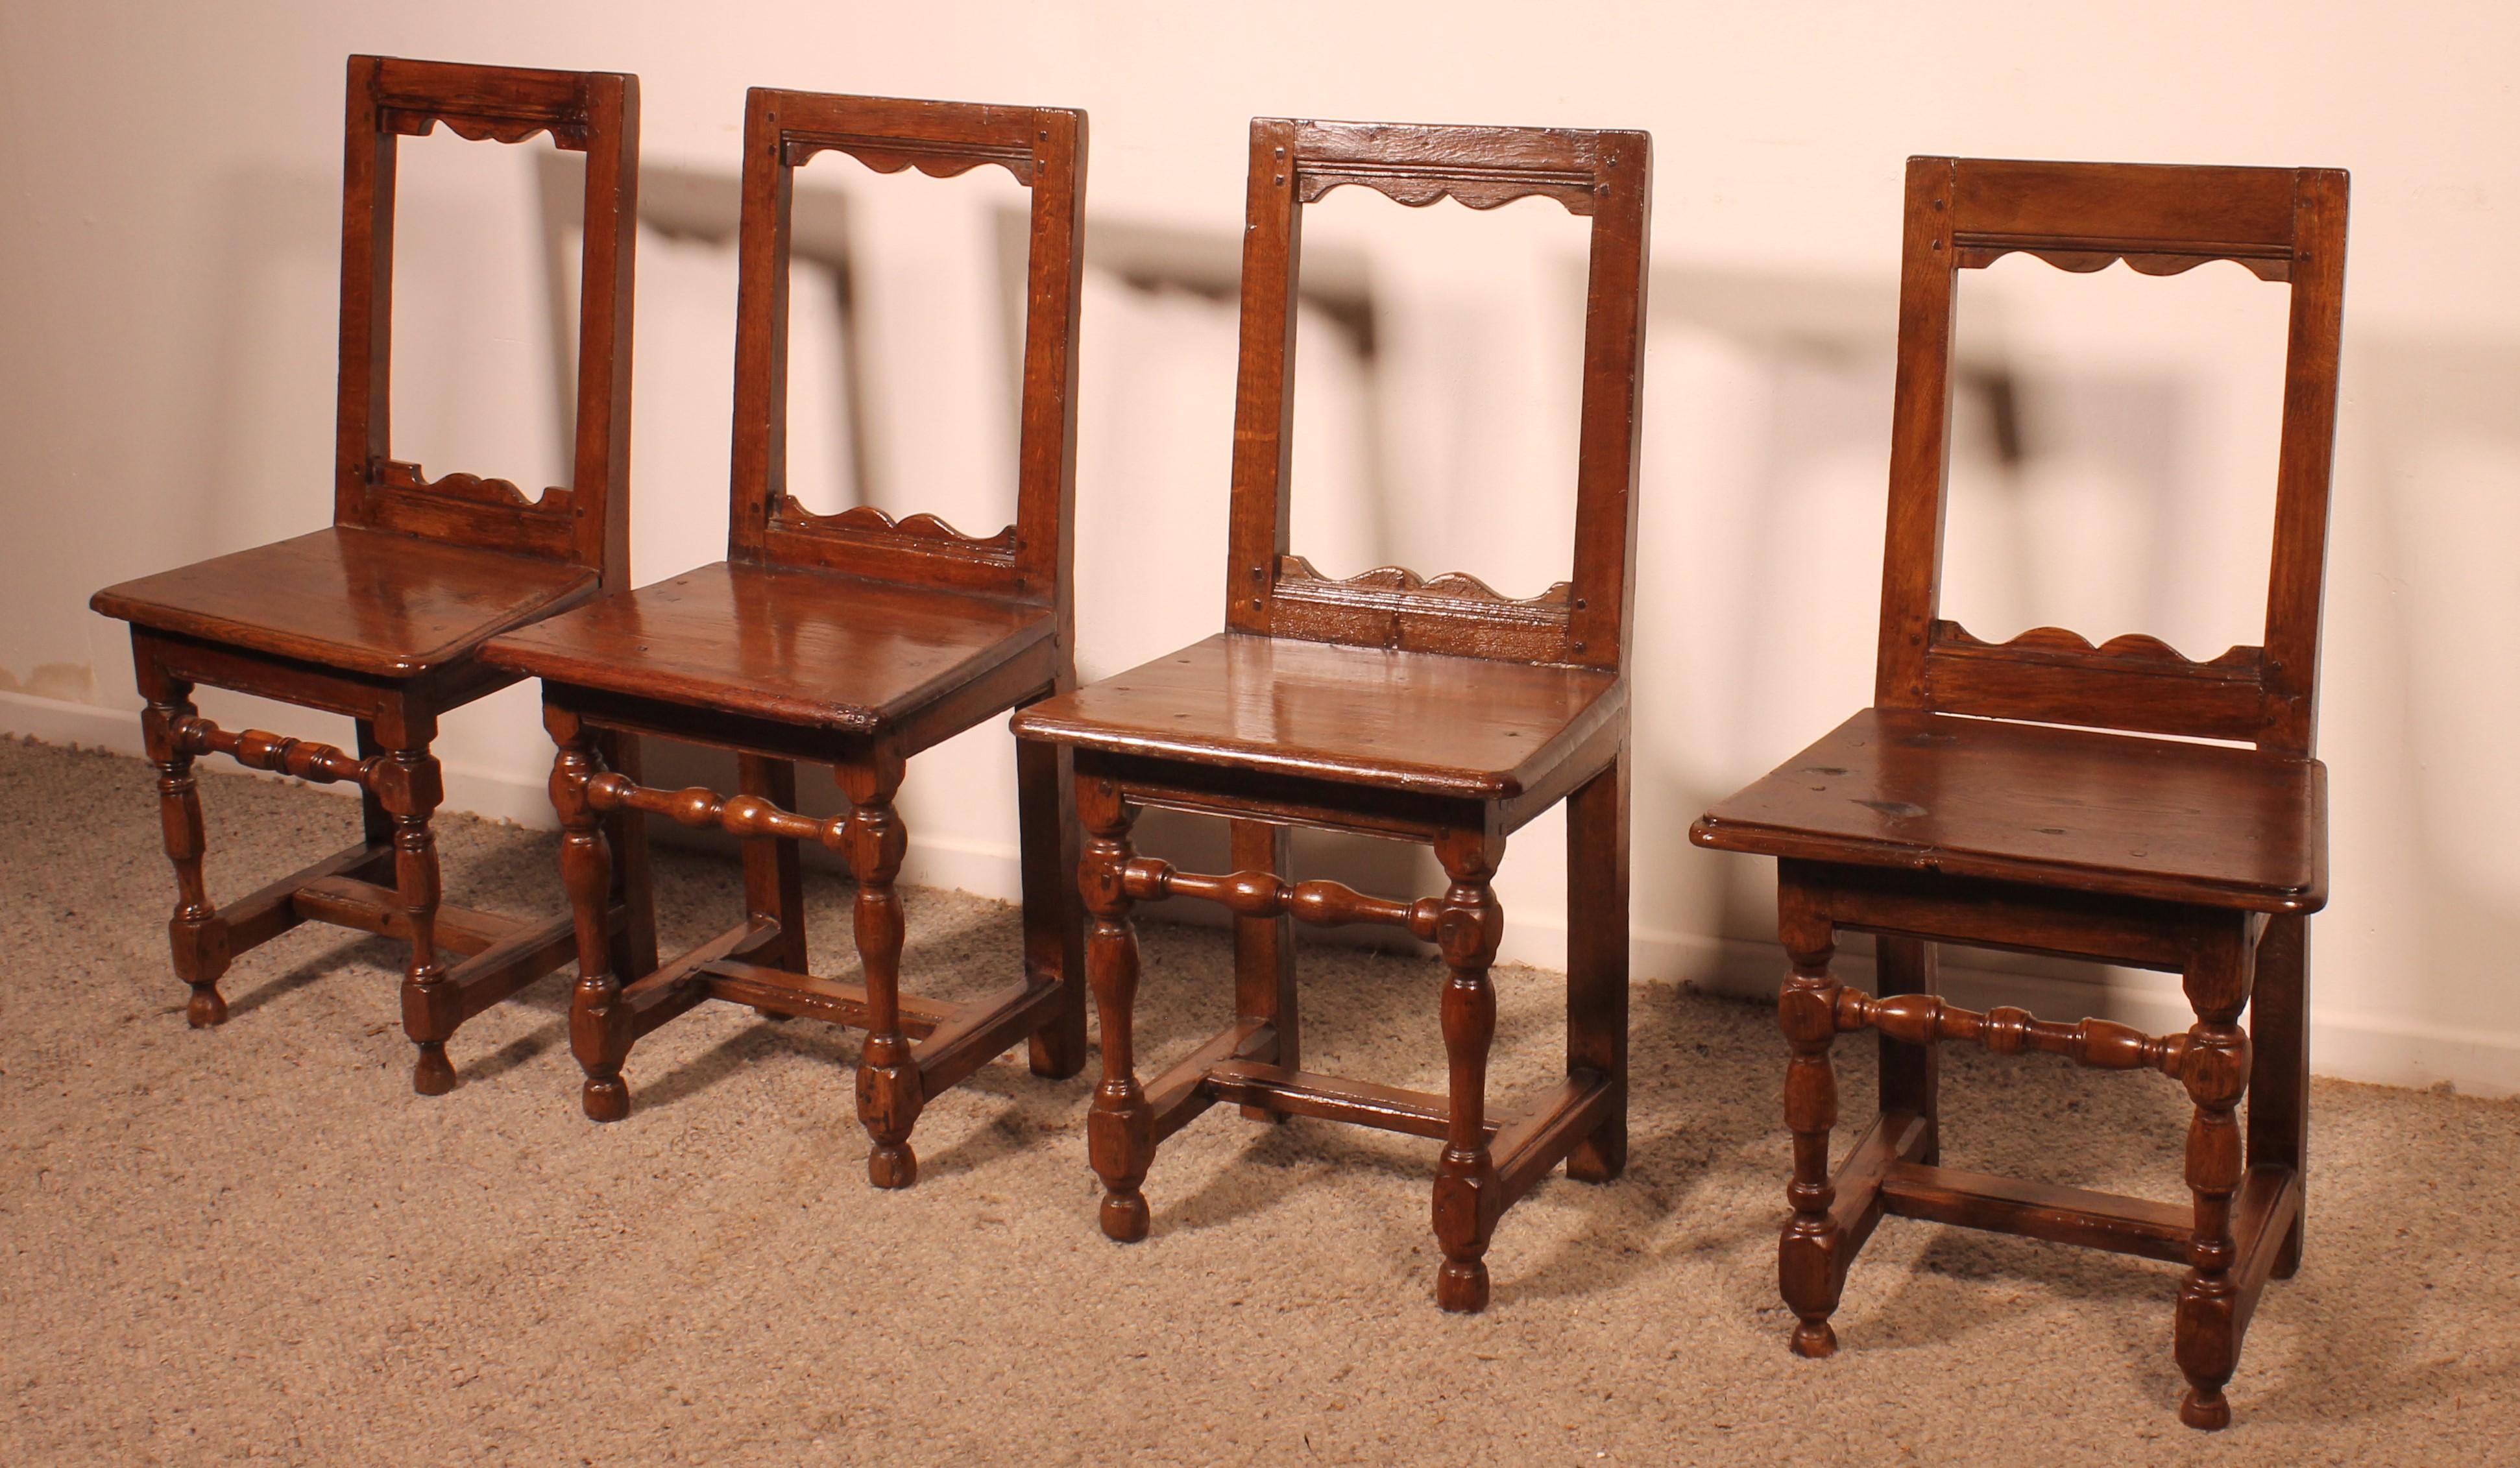 lovely set of 4 Lorraires oak chairs from the 18th century.
This beautiful set of French provenance are in oak and in superb condition.
Seat height 44cm
Very beautiful turning connected by a H-shaped spacer
Molded seat and sculpted and molded